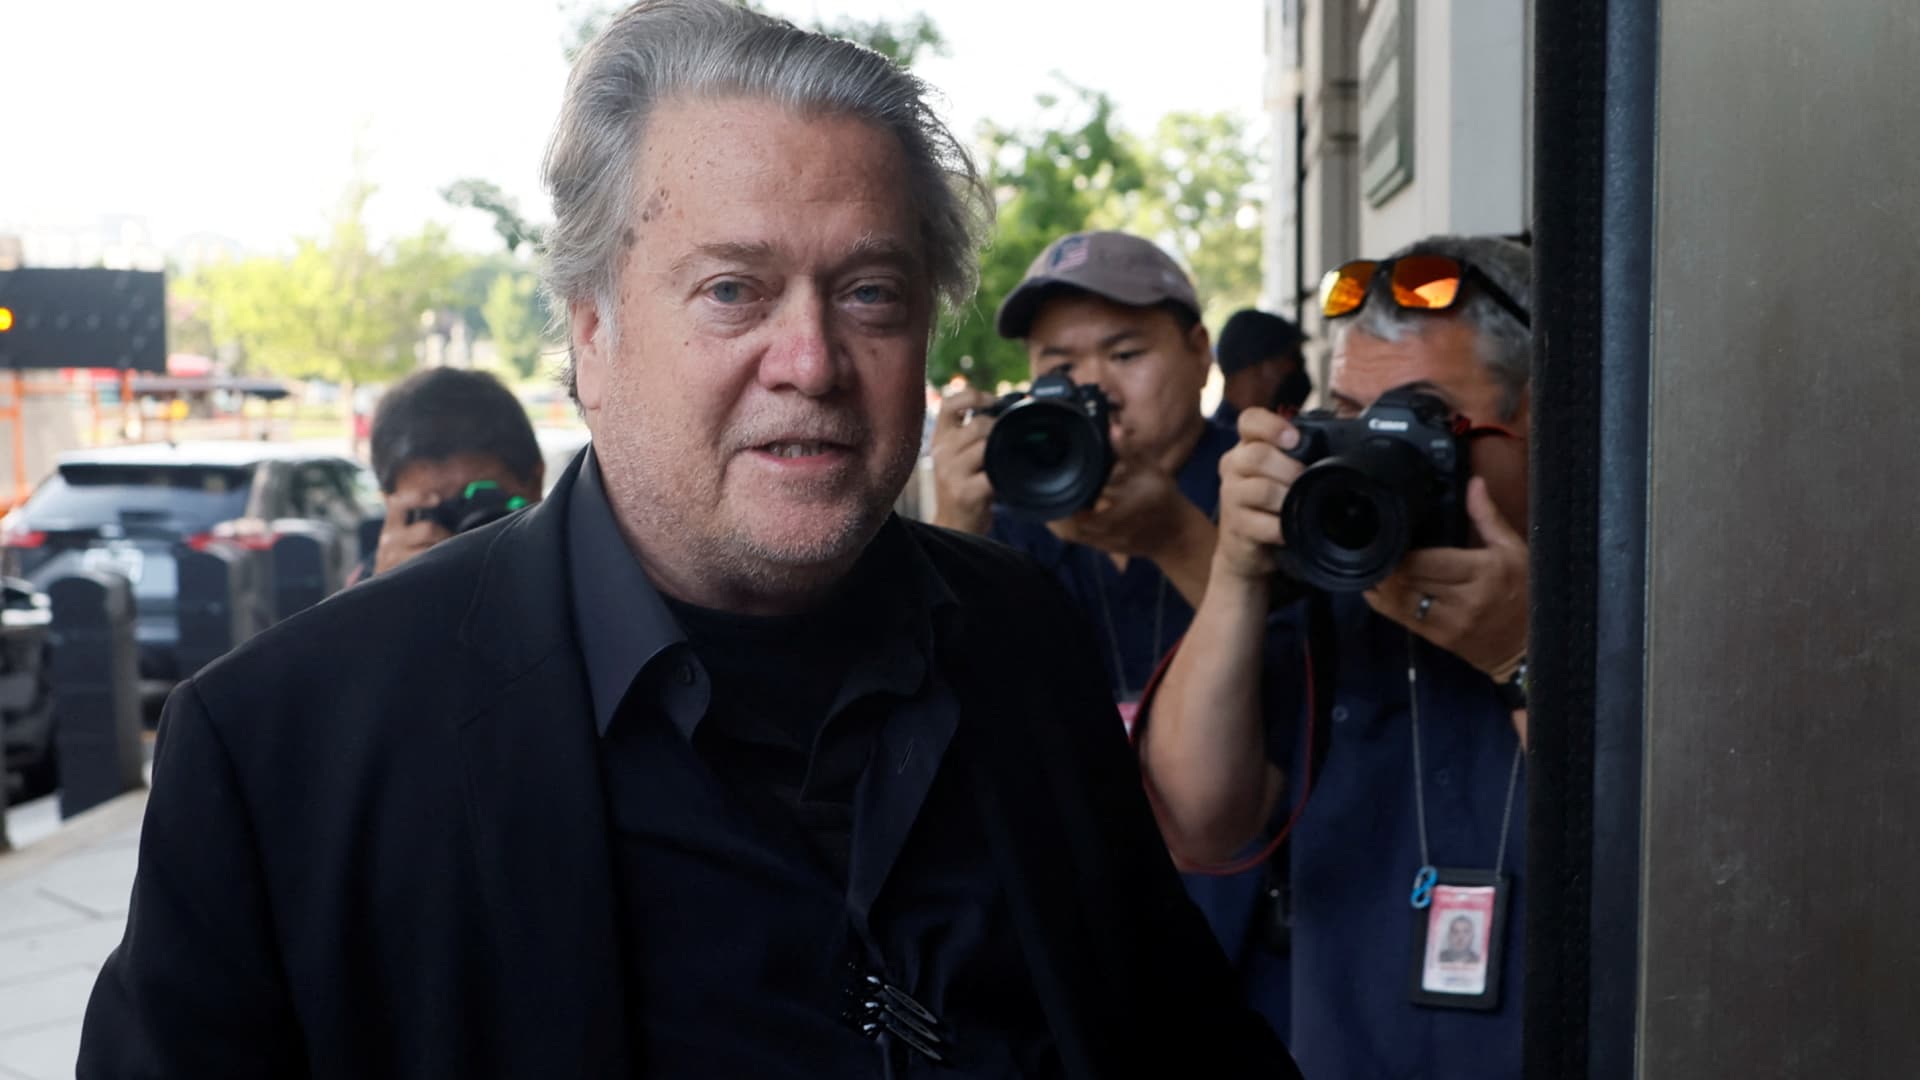 Jury starts deliberations in contempt trial of former Trump aide Steve Bannon